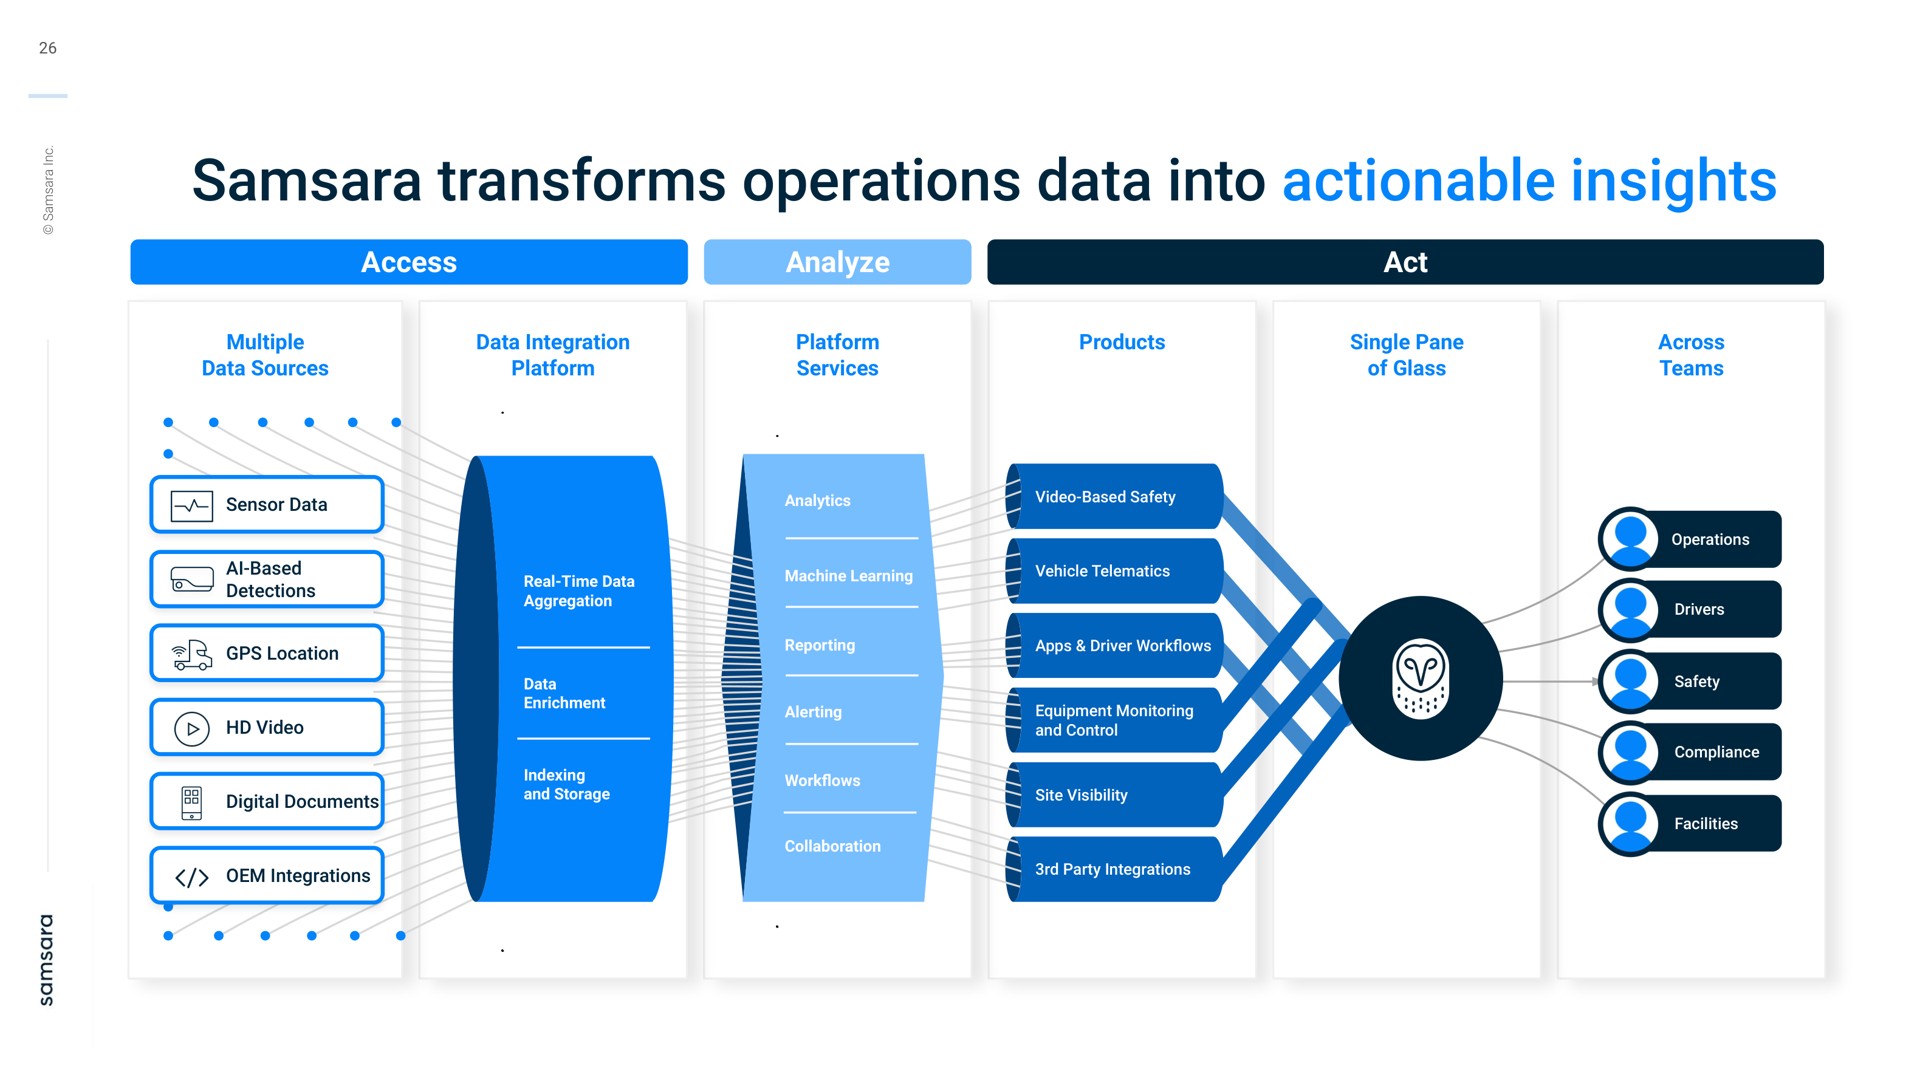 samsara transforms operations data into actionable insights access multiple data sources data integration platform analyze platform services products act single pane of glass sensor data based detections location video digital documents integrations across teams i a | Samsara